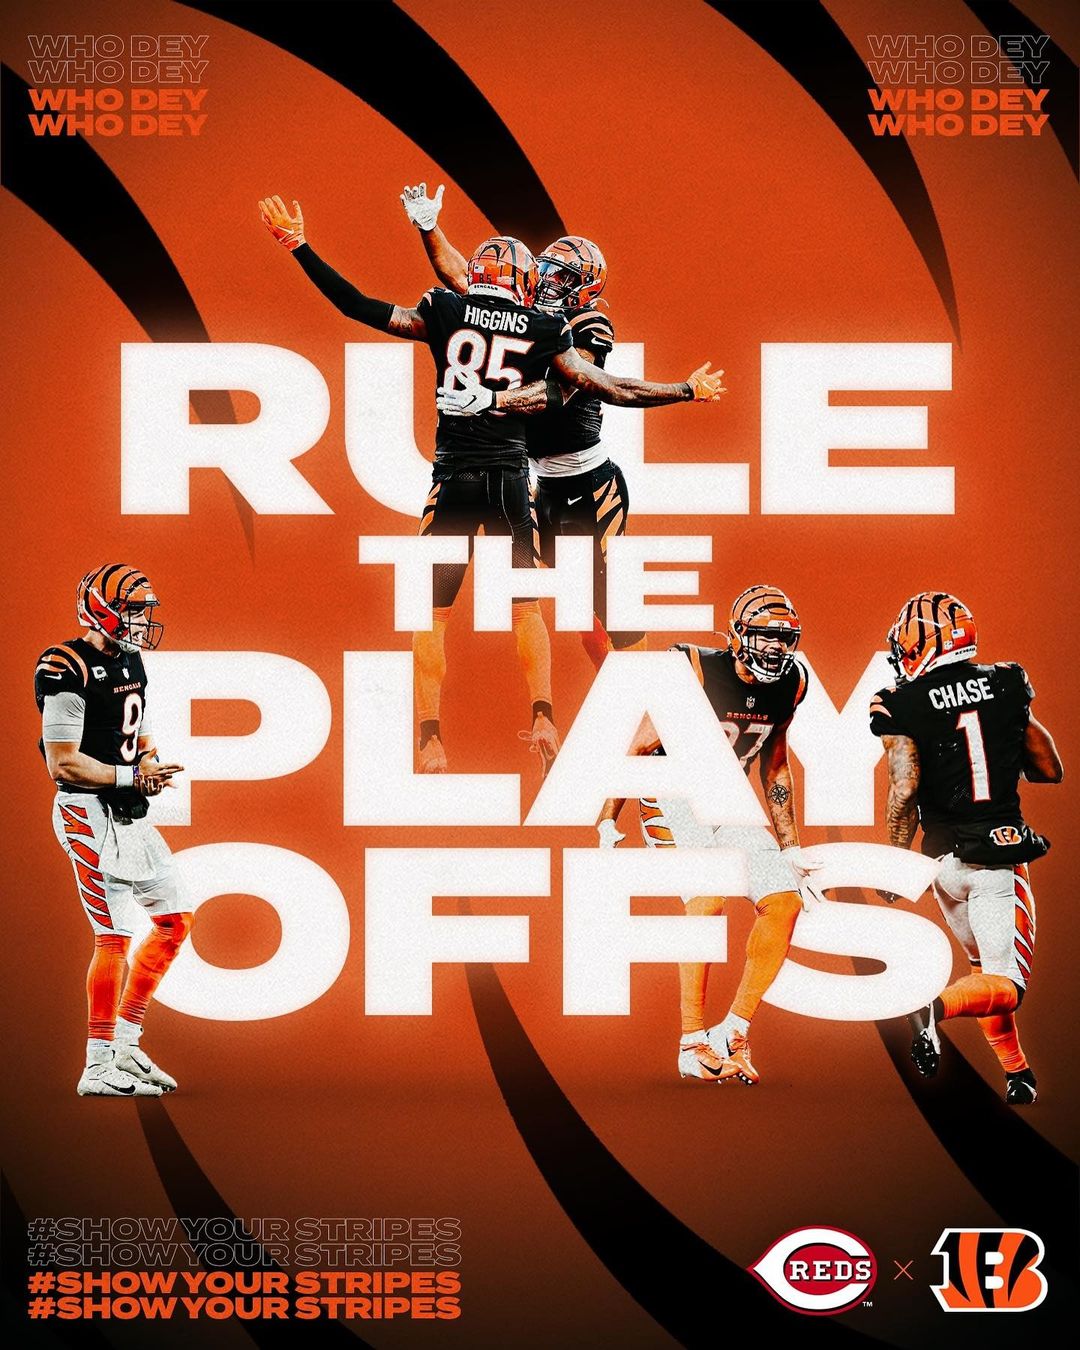 The whole city is behind you, @bengals!  #ShowYourStripes #RuleThePlayoffs...